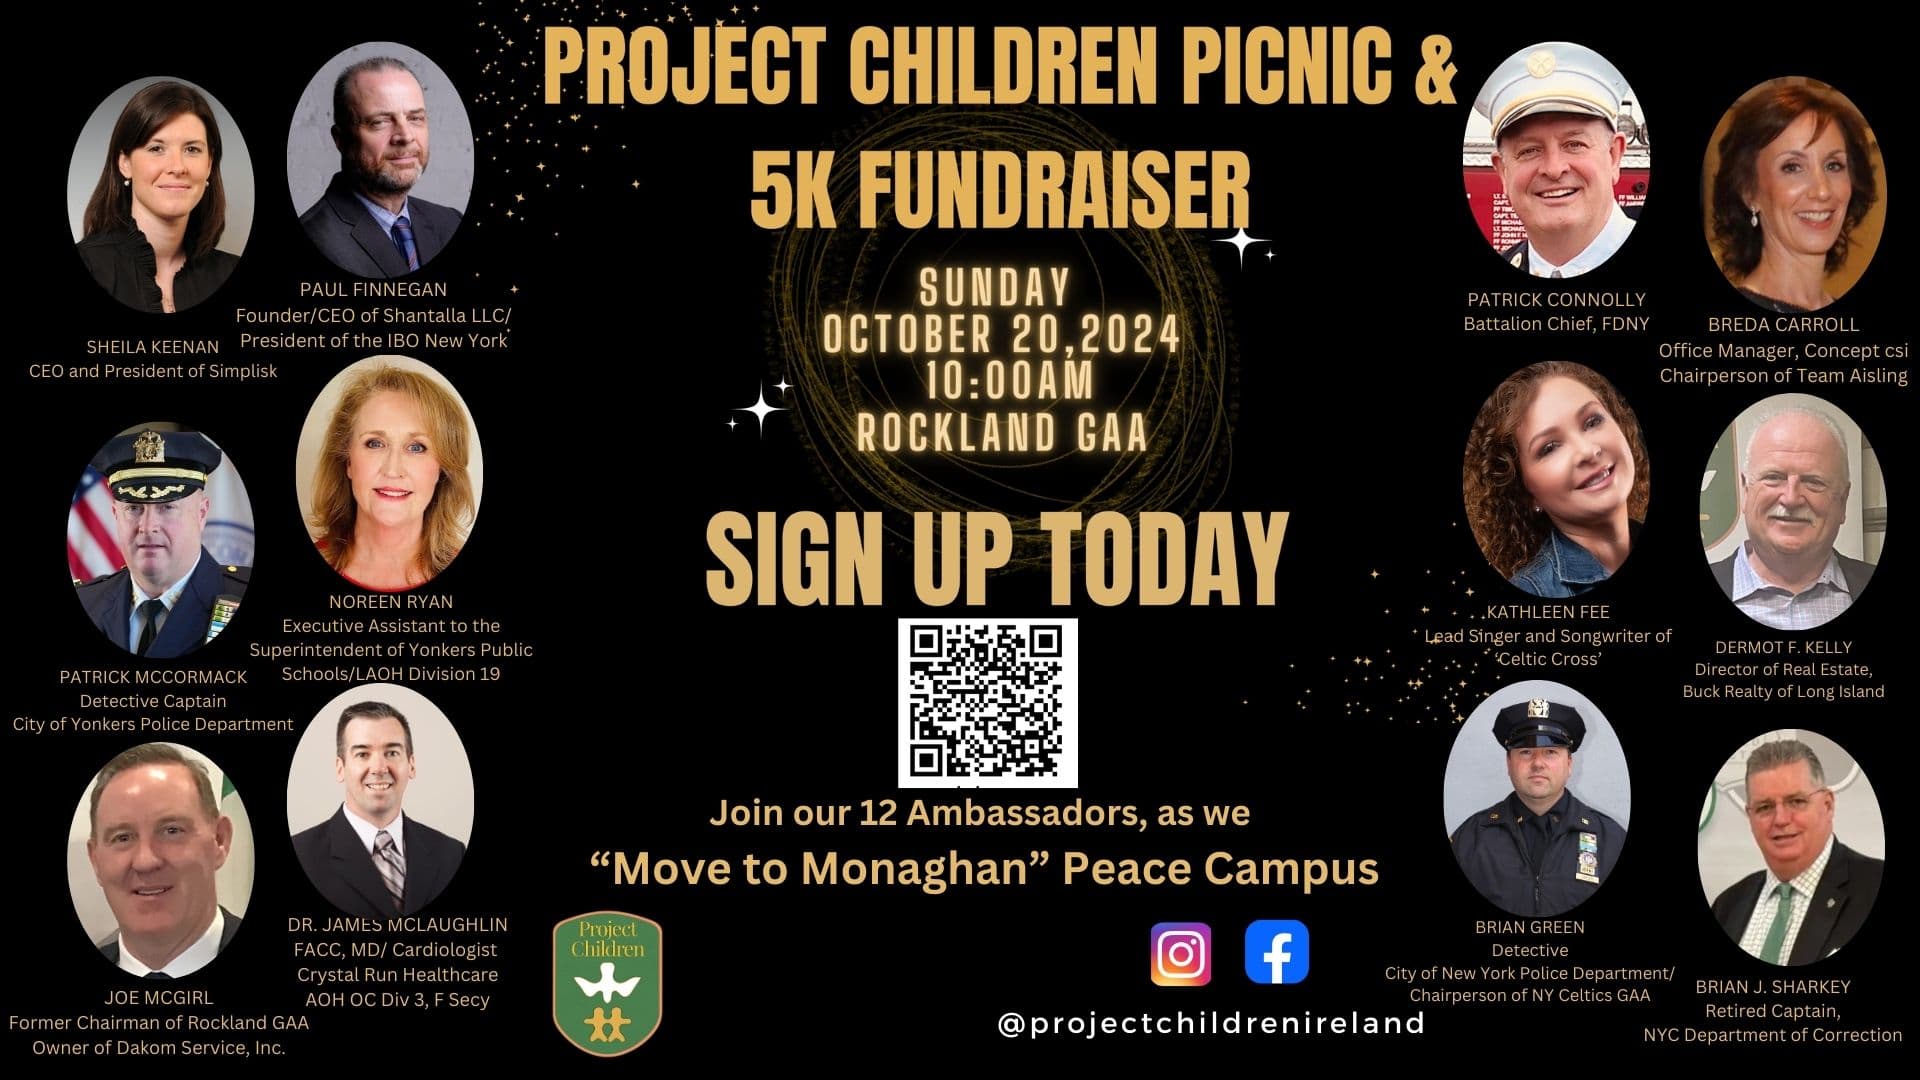 A poster for Project Children's Move to Monaghan Peace Campus Picnic and 5k Fundraiser. The poster includes headshots of the 12 Project Children Ambassadors as well as information about the fundraiser event. Event date: Sunday, October 20, 2024 at 10:00am at the Rockland GAA. Vistors are encouraged to join a 5k team today.